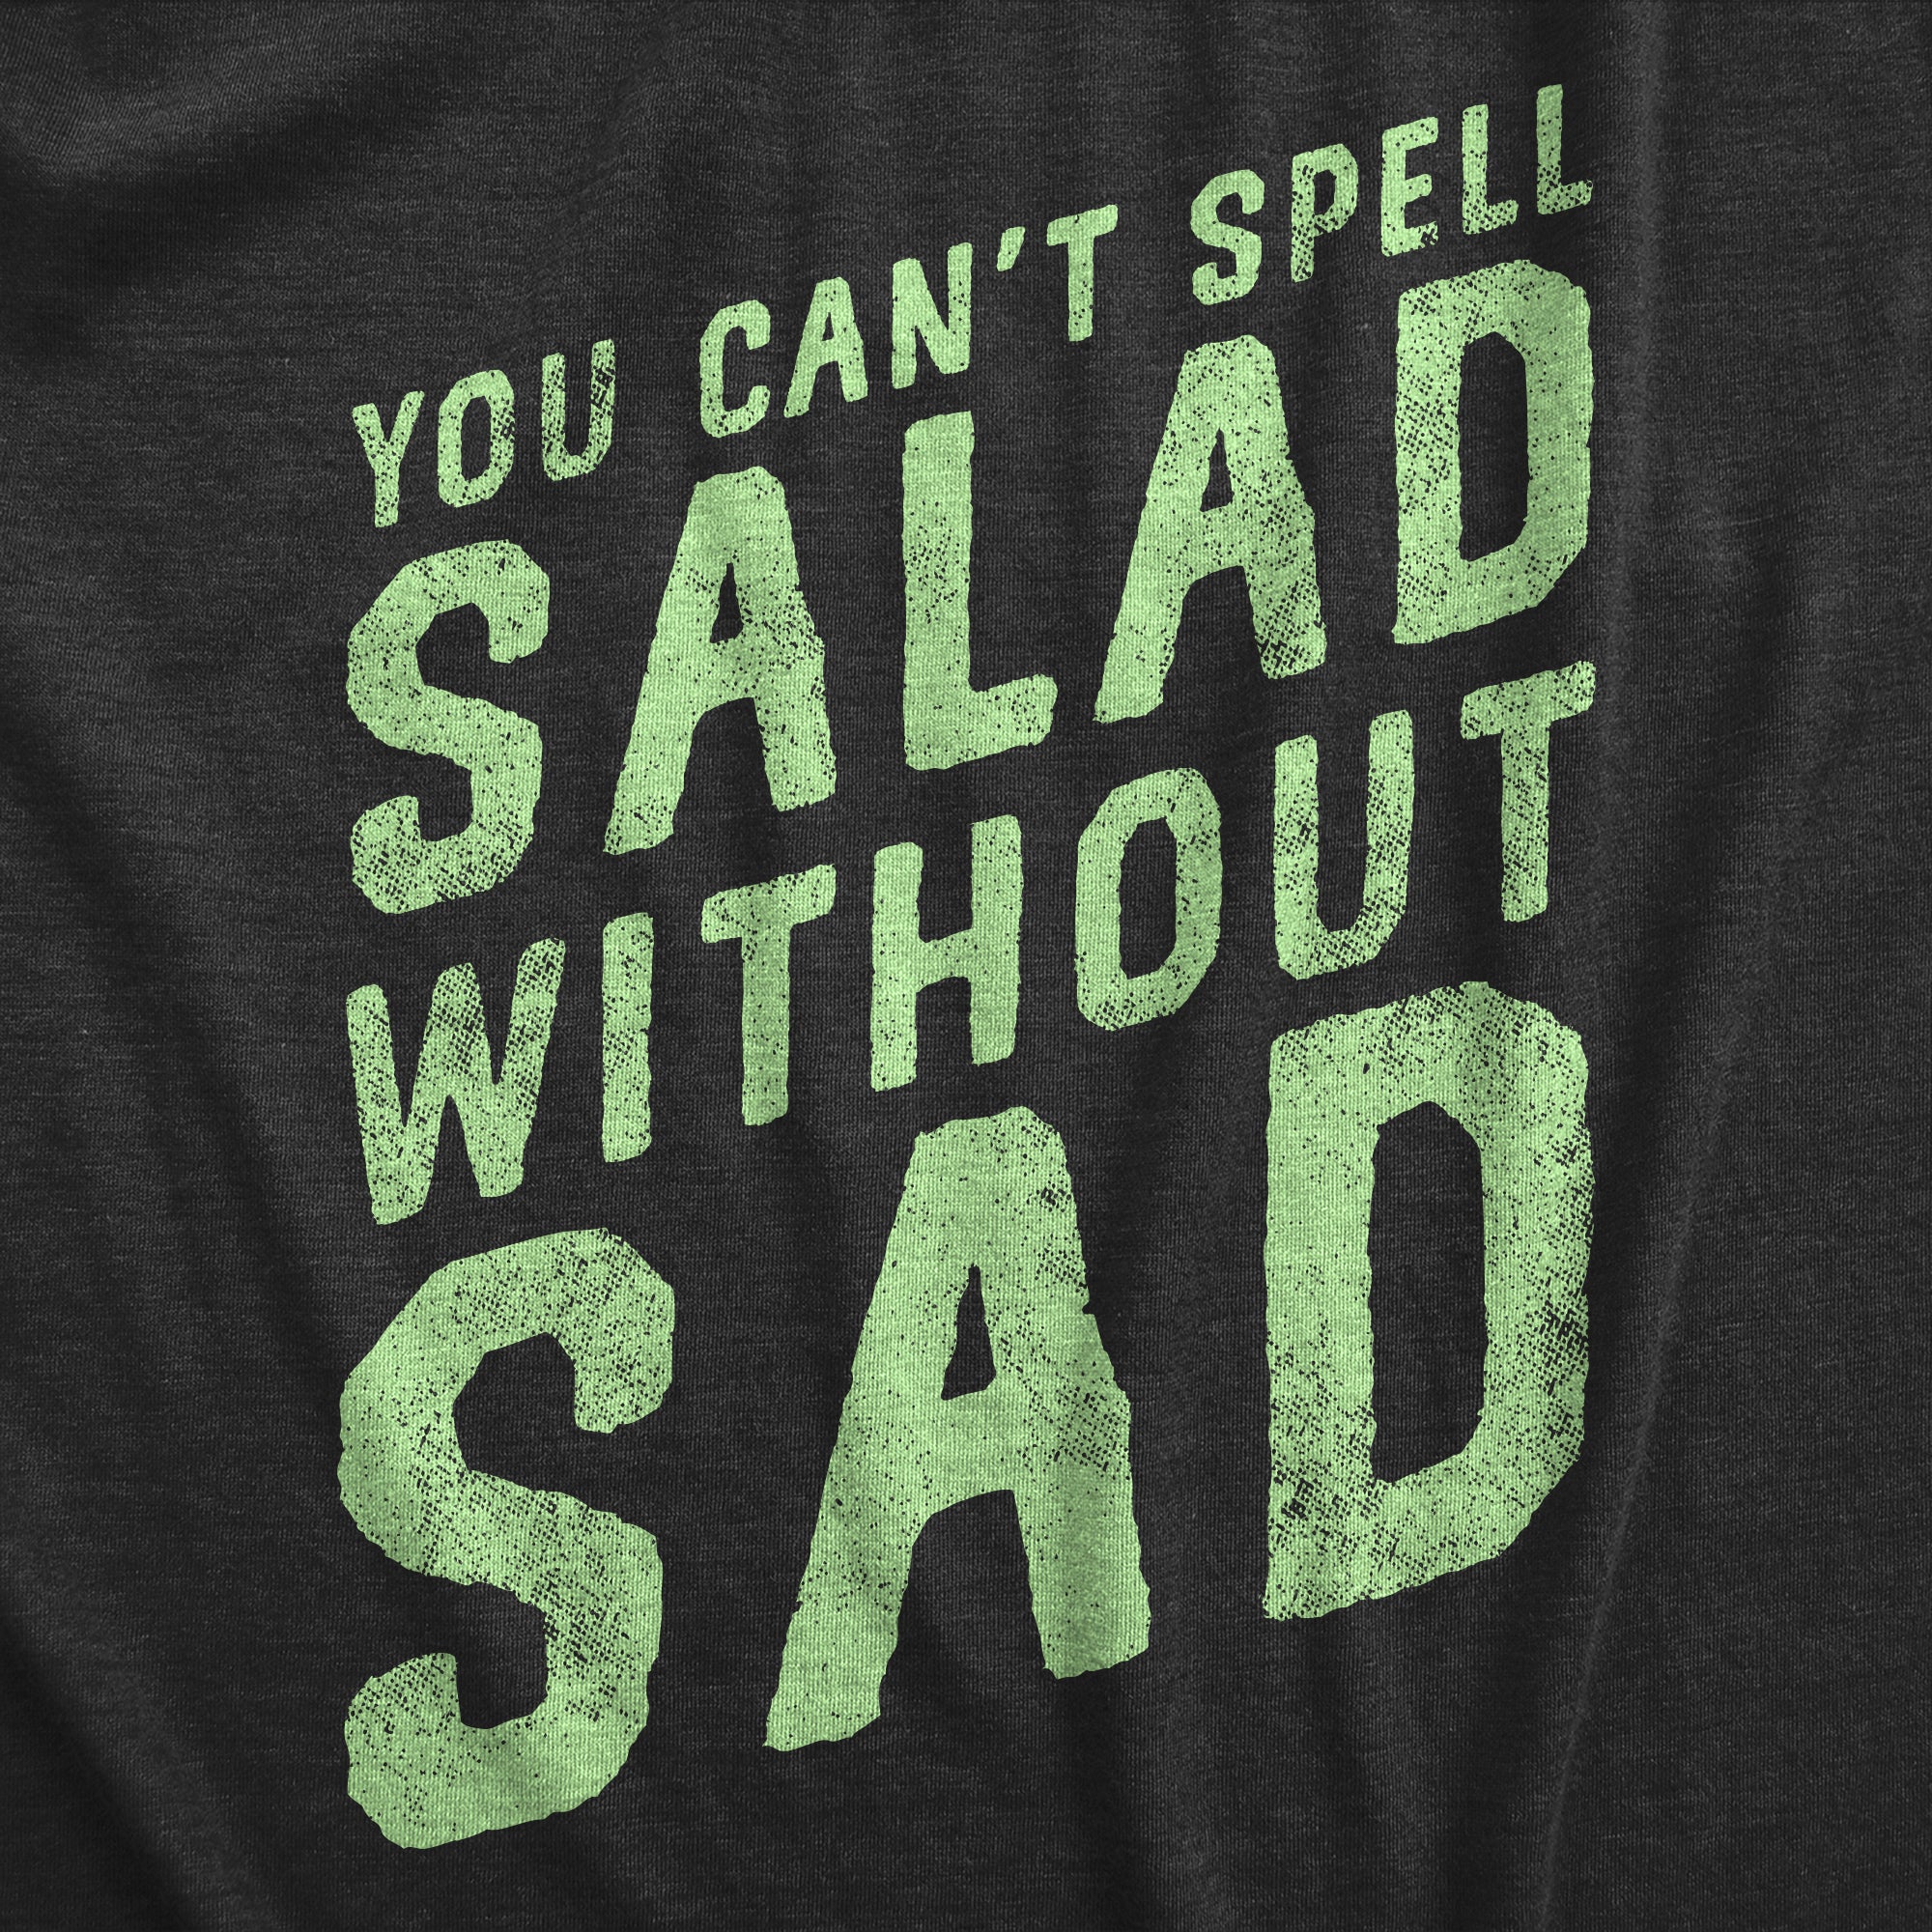 Funny Heather Black - SALAD You Cant Spell Salad Without Sad Mens T Shirt Nerdy Food sarcastic Tee